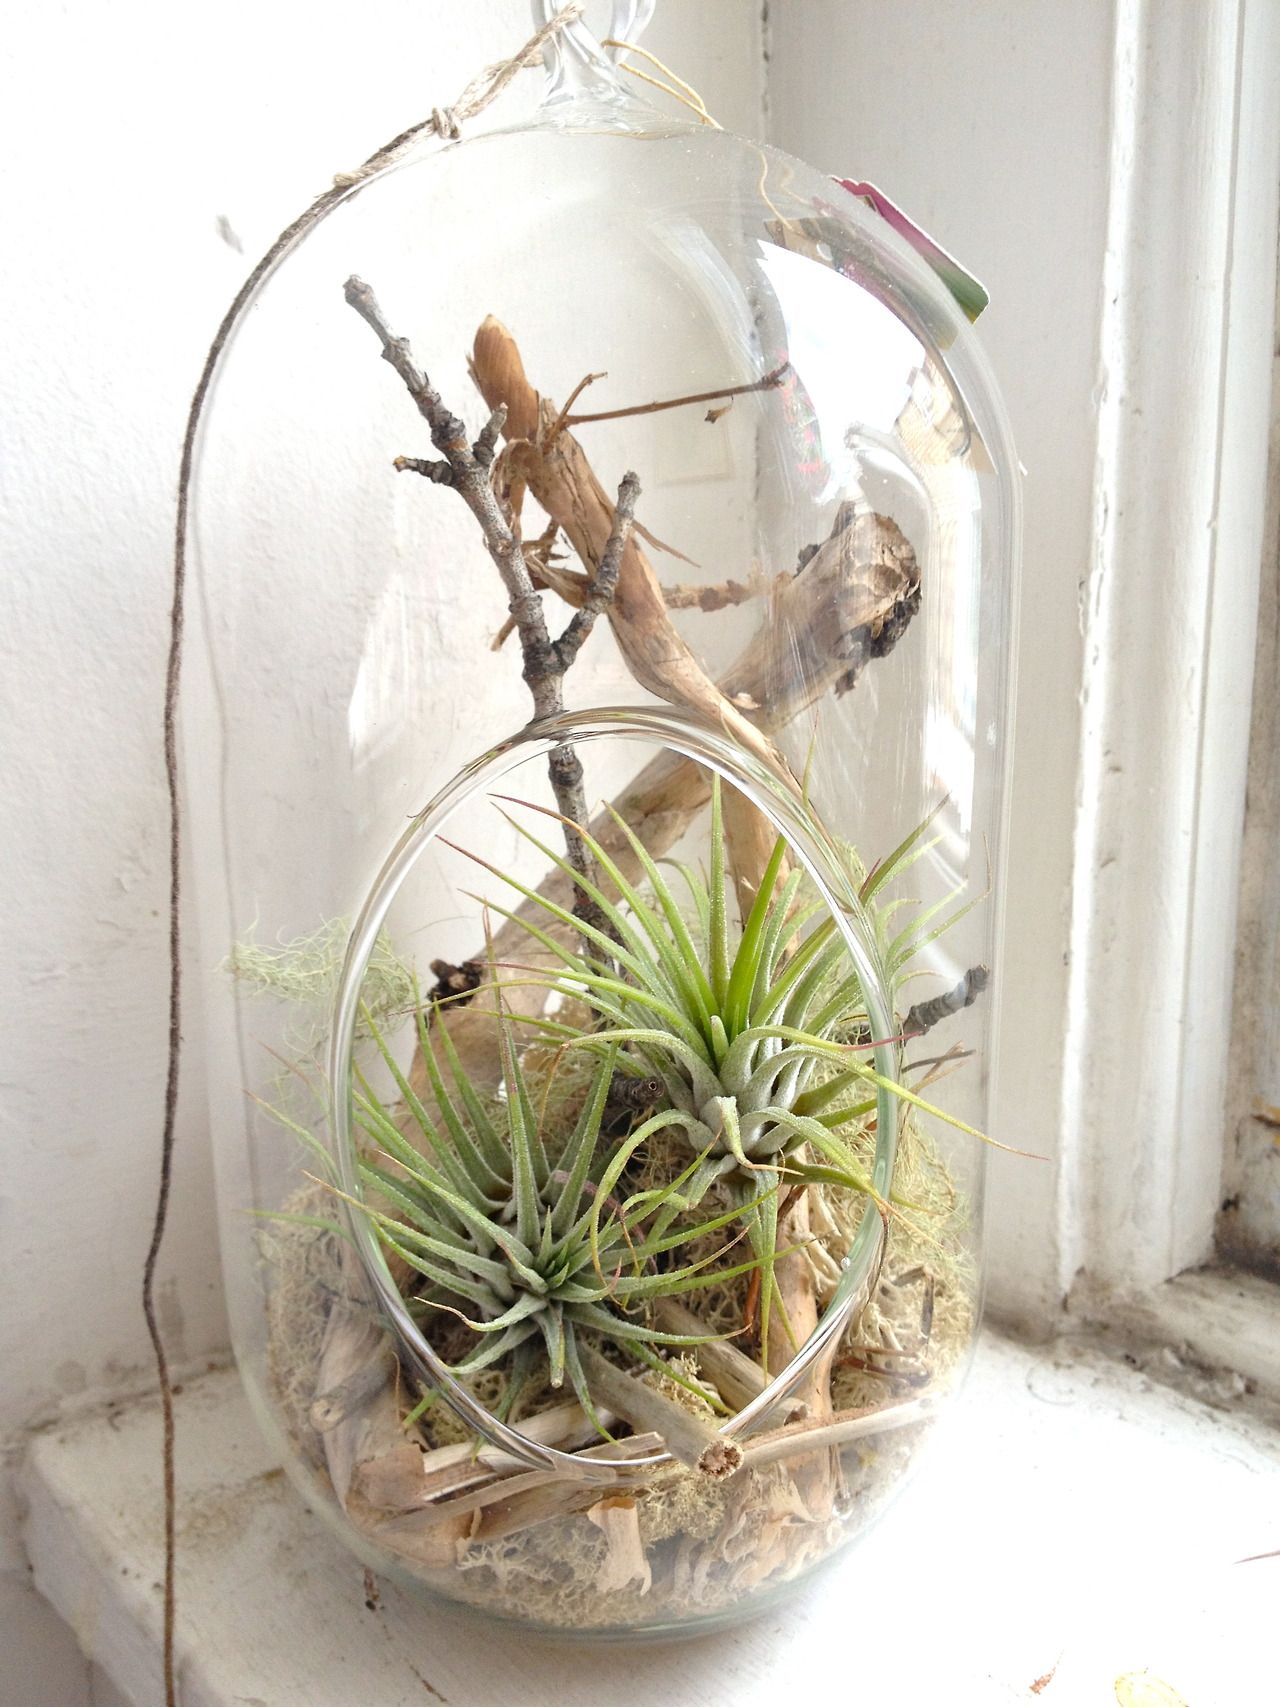 Tall Aerium with two ion rubra air plants, old man's beard lichen ...